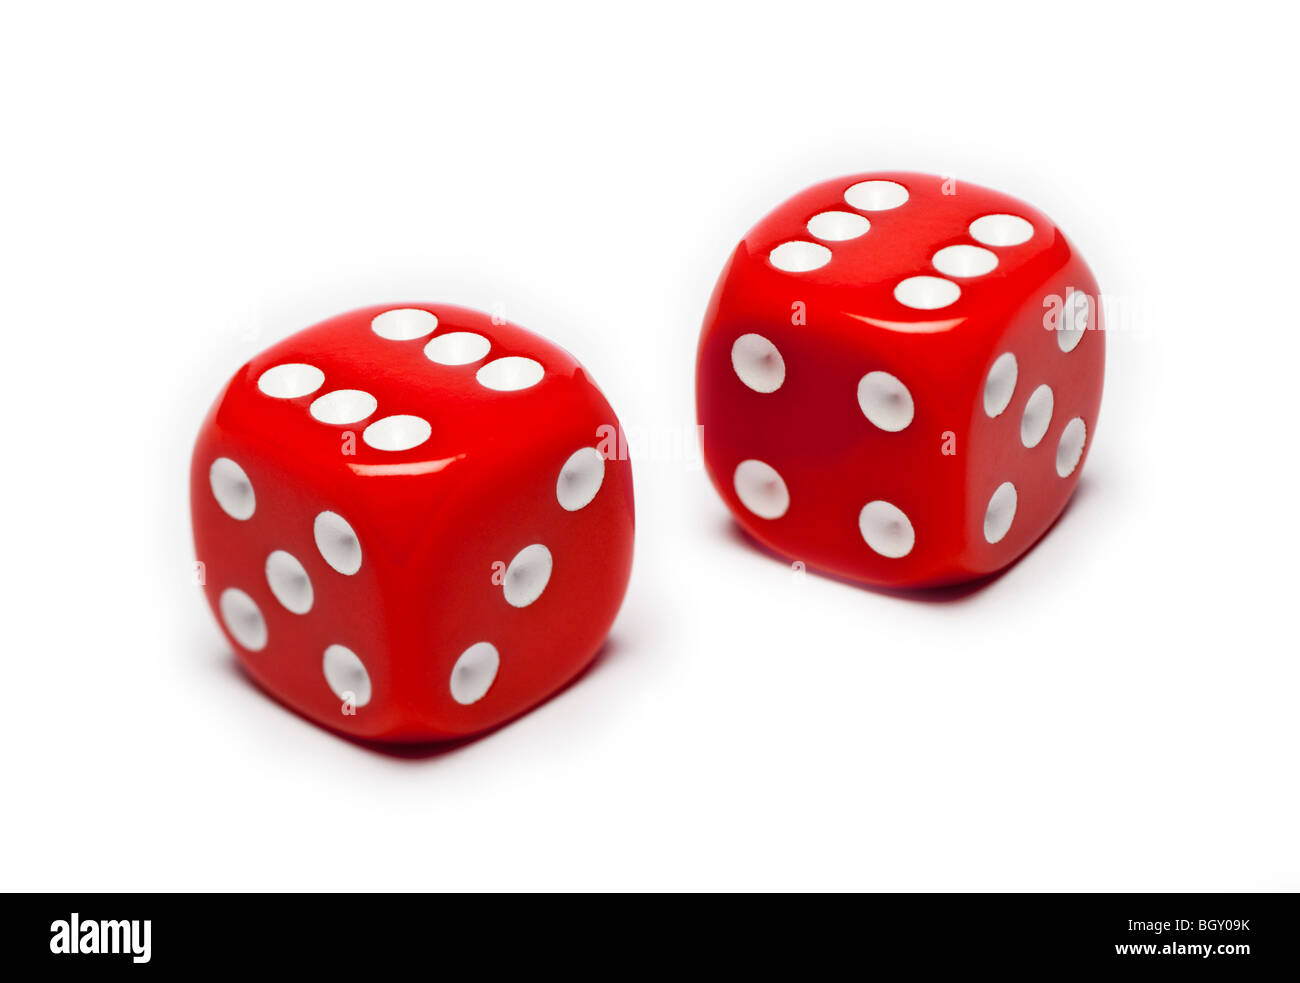 Pair of red dice Stock Photo